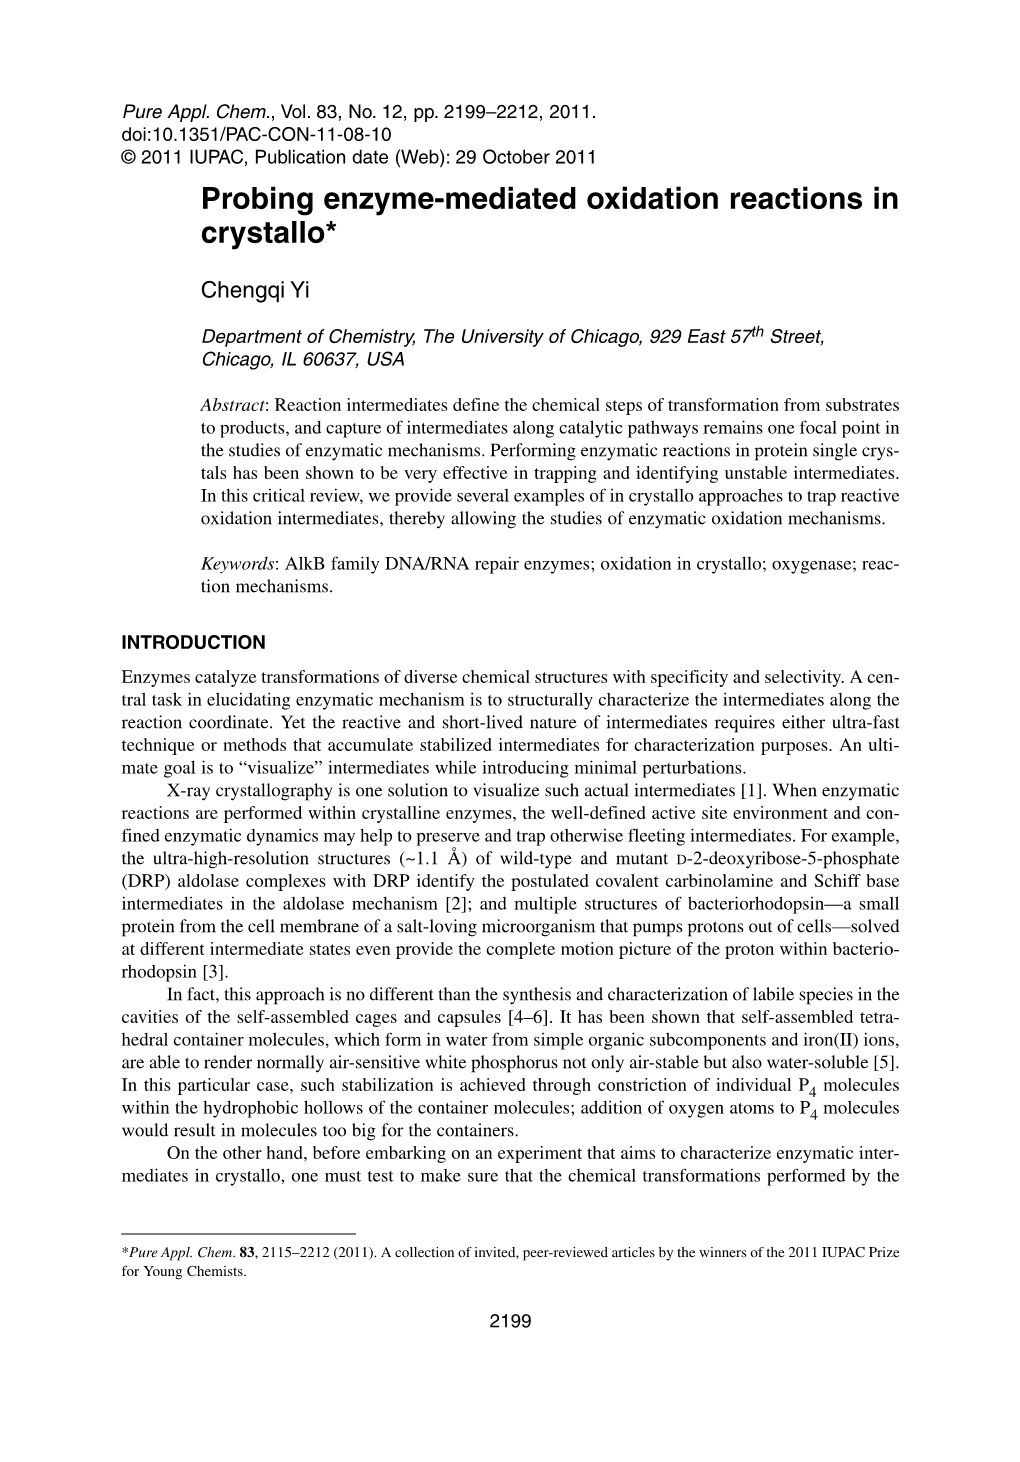 Probing Enzyme-Mediated Oxidation Reactions in Crystallo*